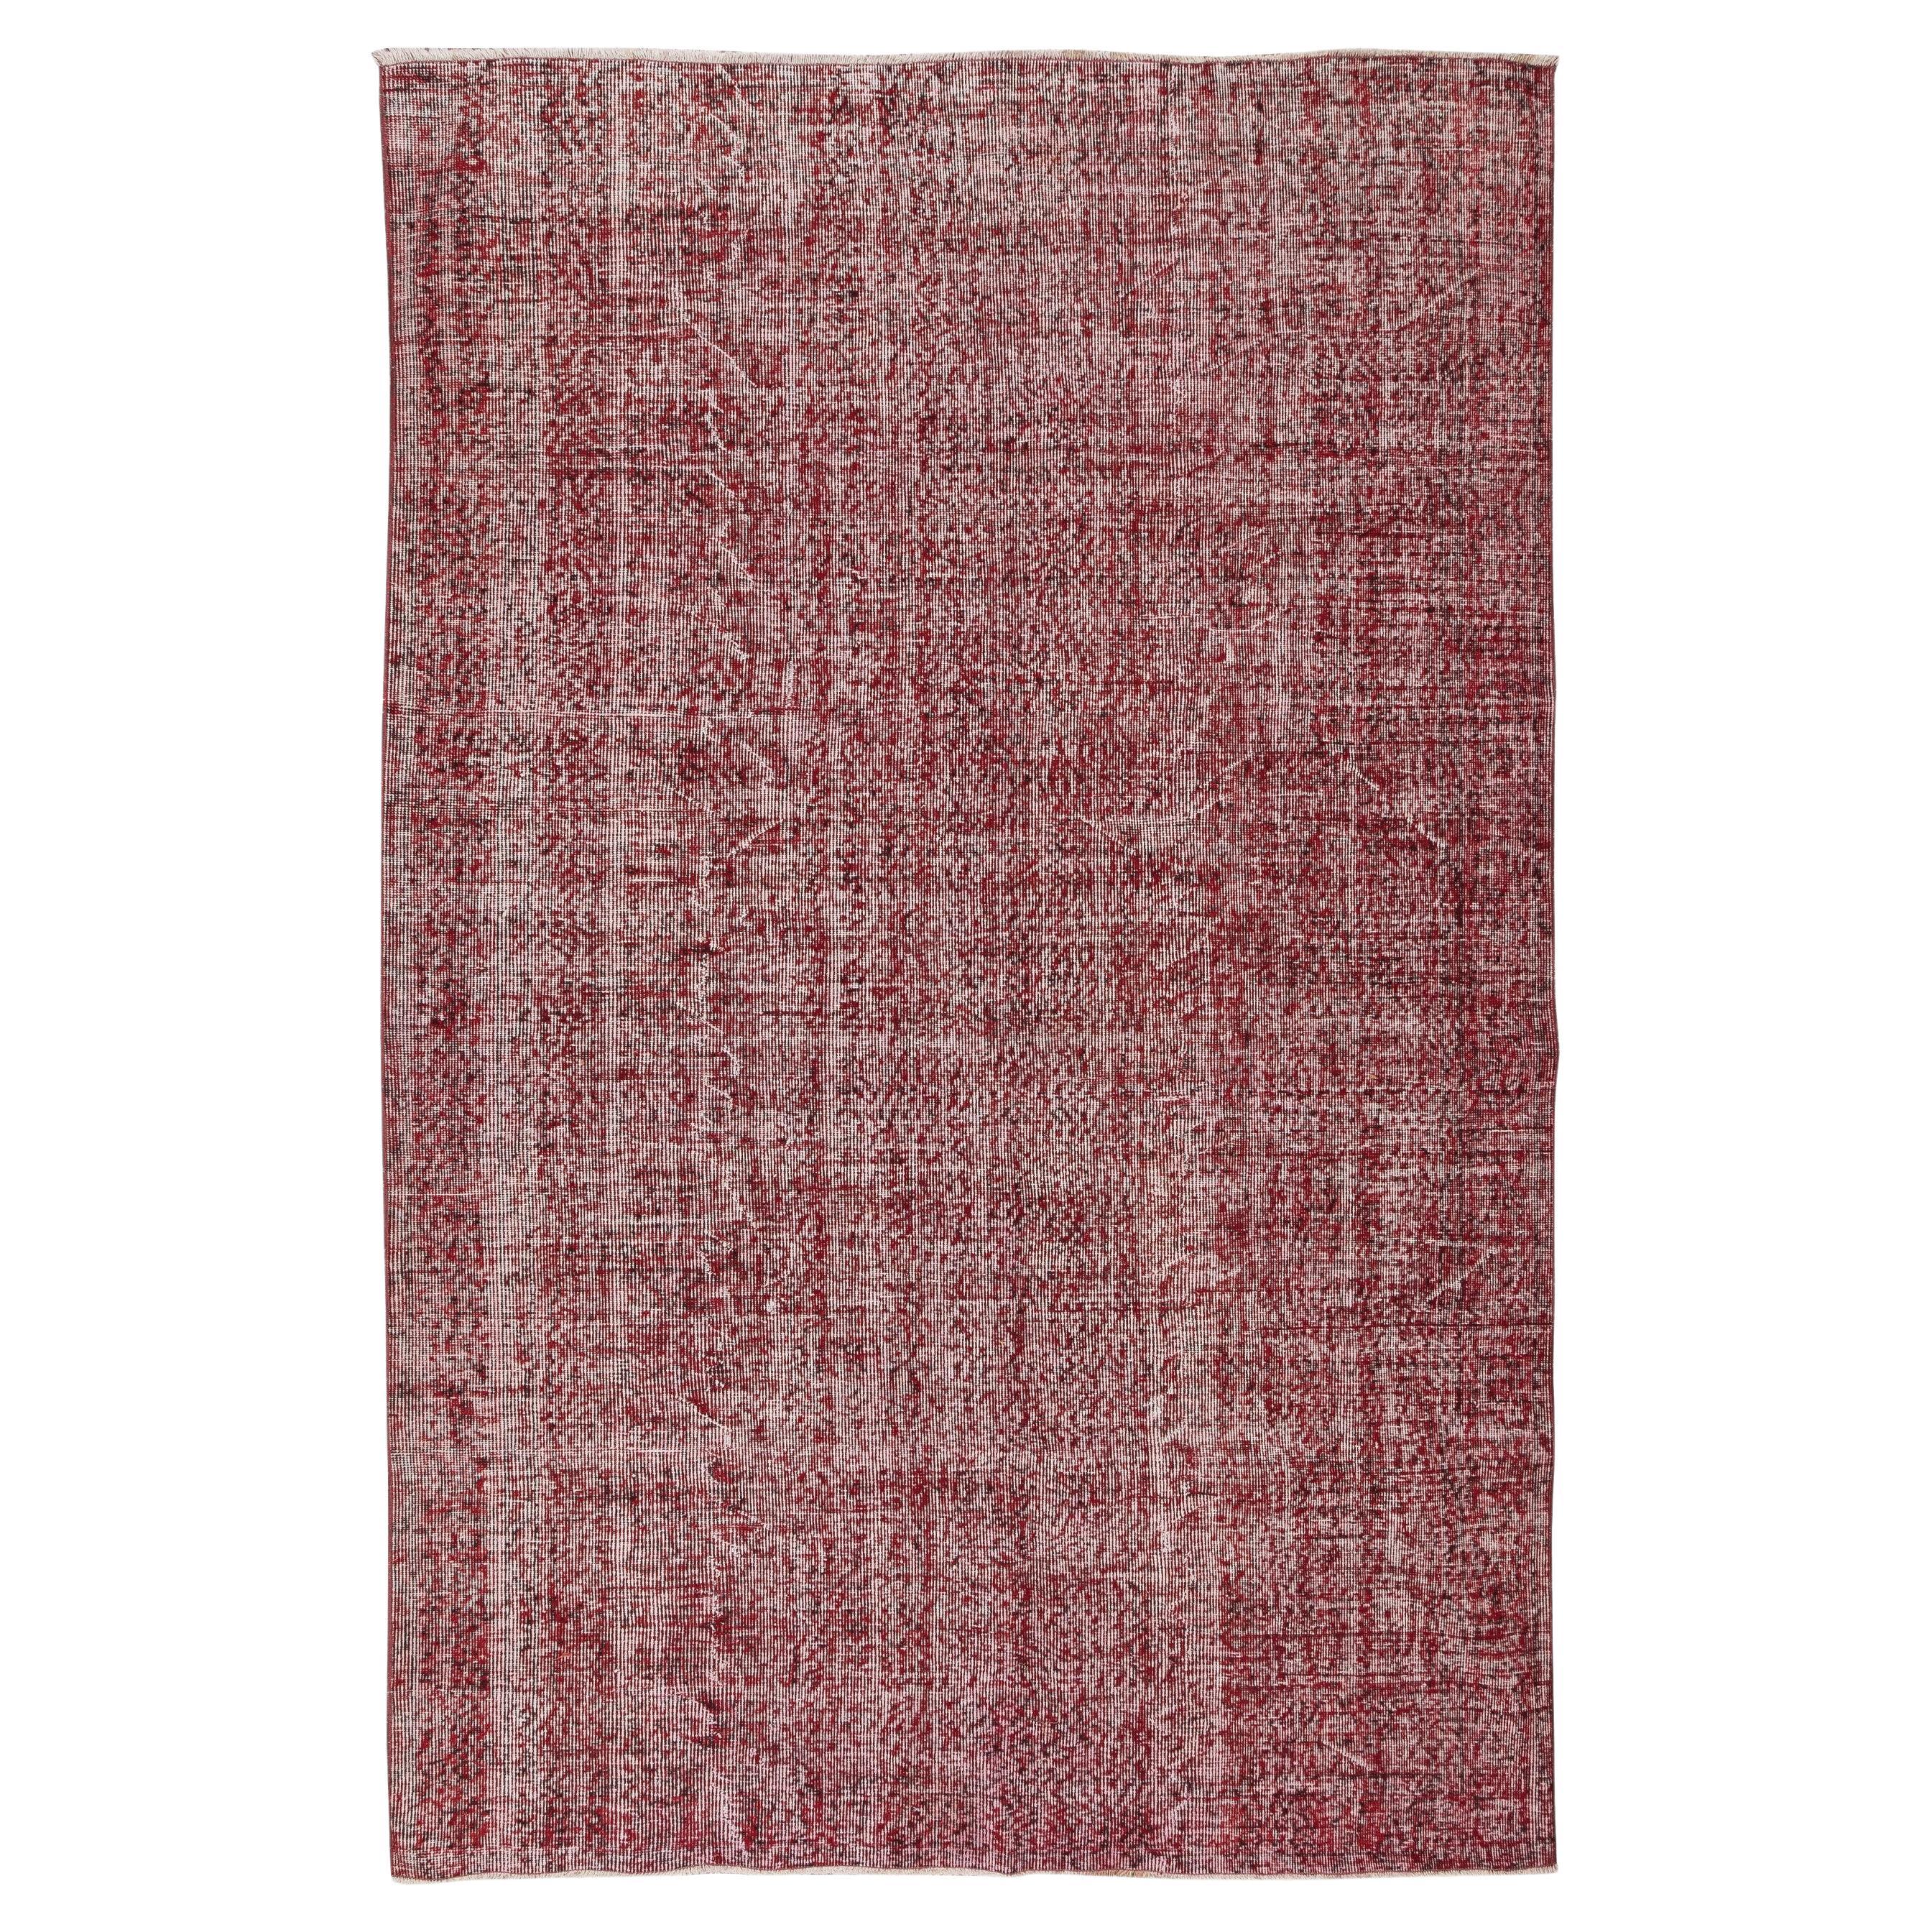 6.4x9.6 Ft Handmade Turkish Vintage Distressed Wool Area Rug in Burgundy Red For Sale